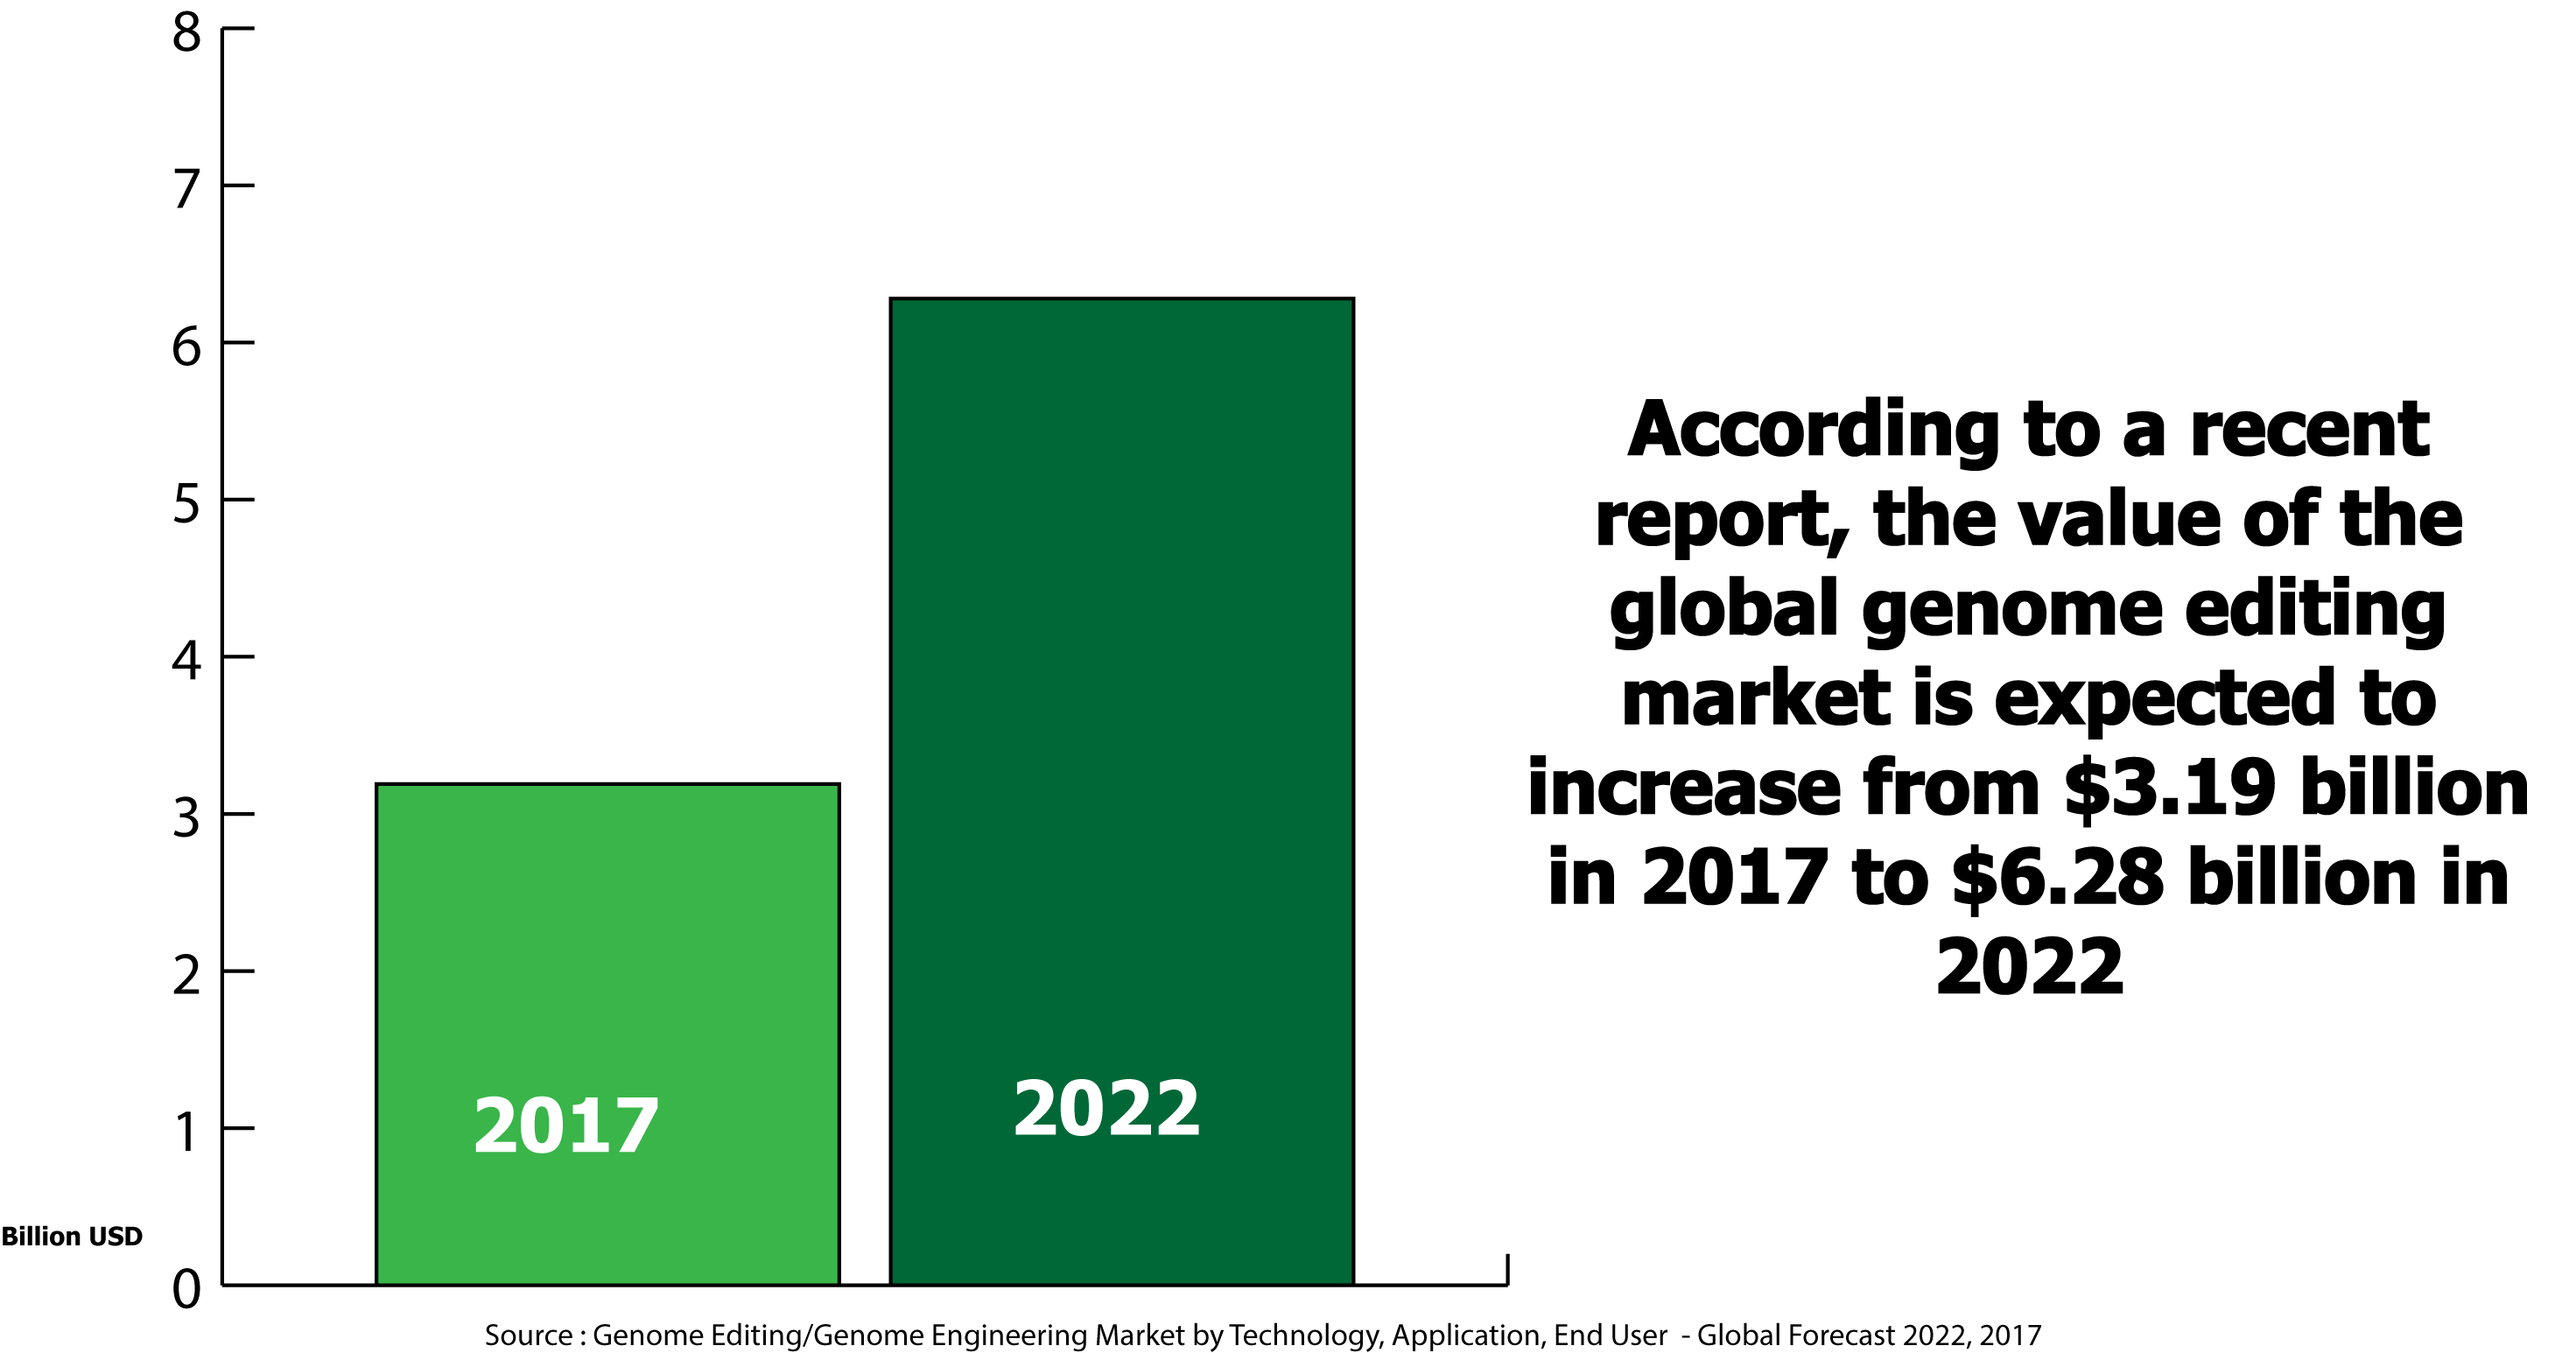 A graph showing the forecasted increase in value of the global genome editing market from 2017 to 2022